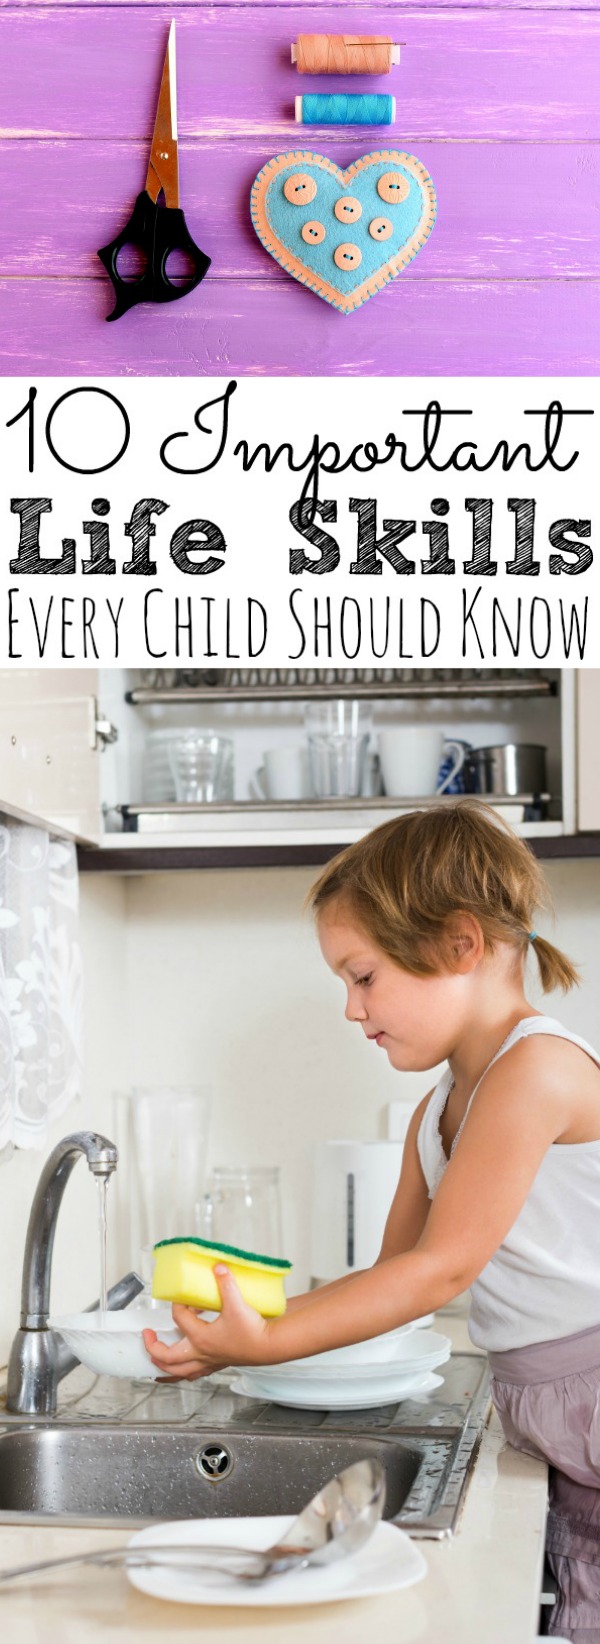 10 Important Life Skills Every Child Should Learn